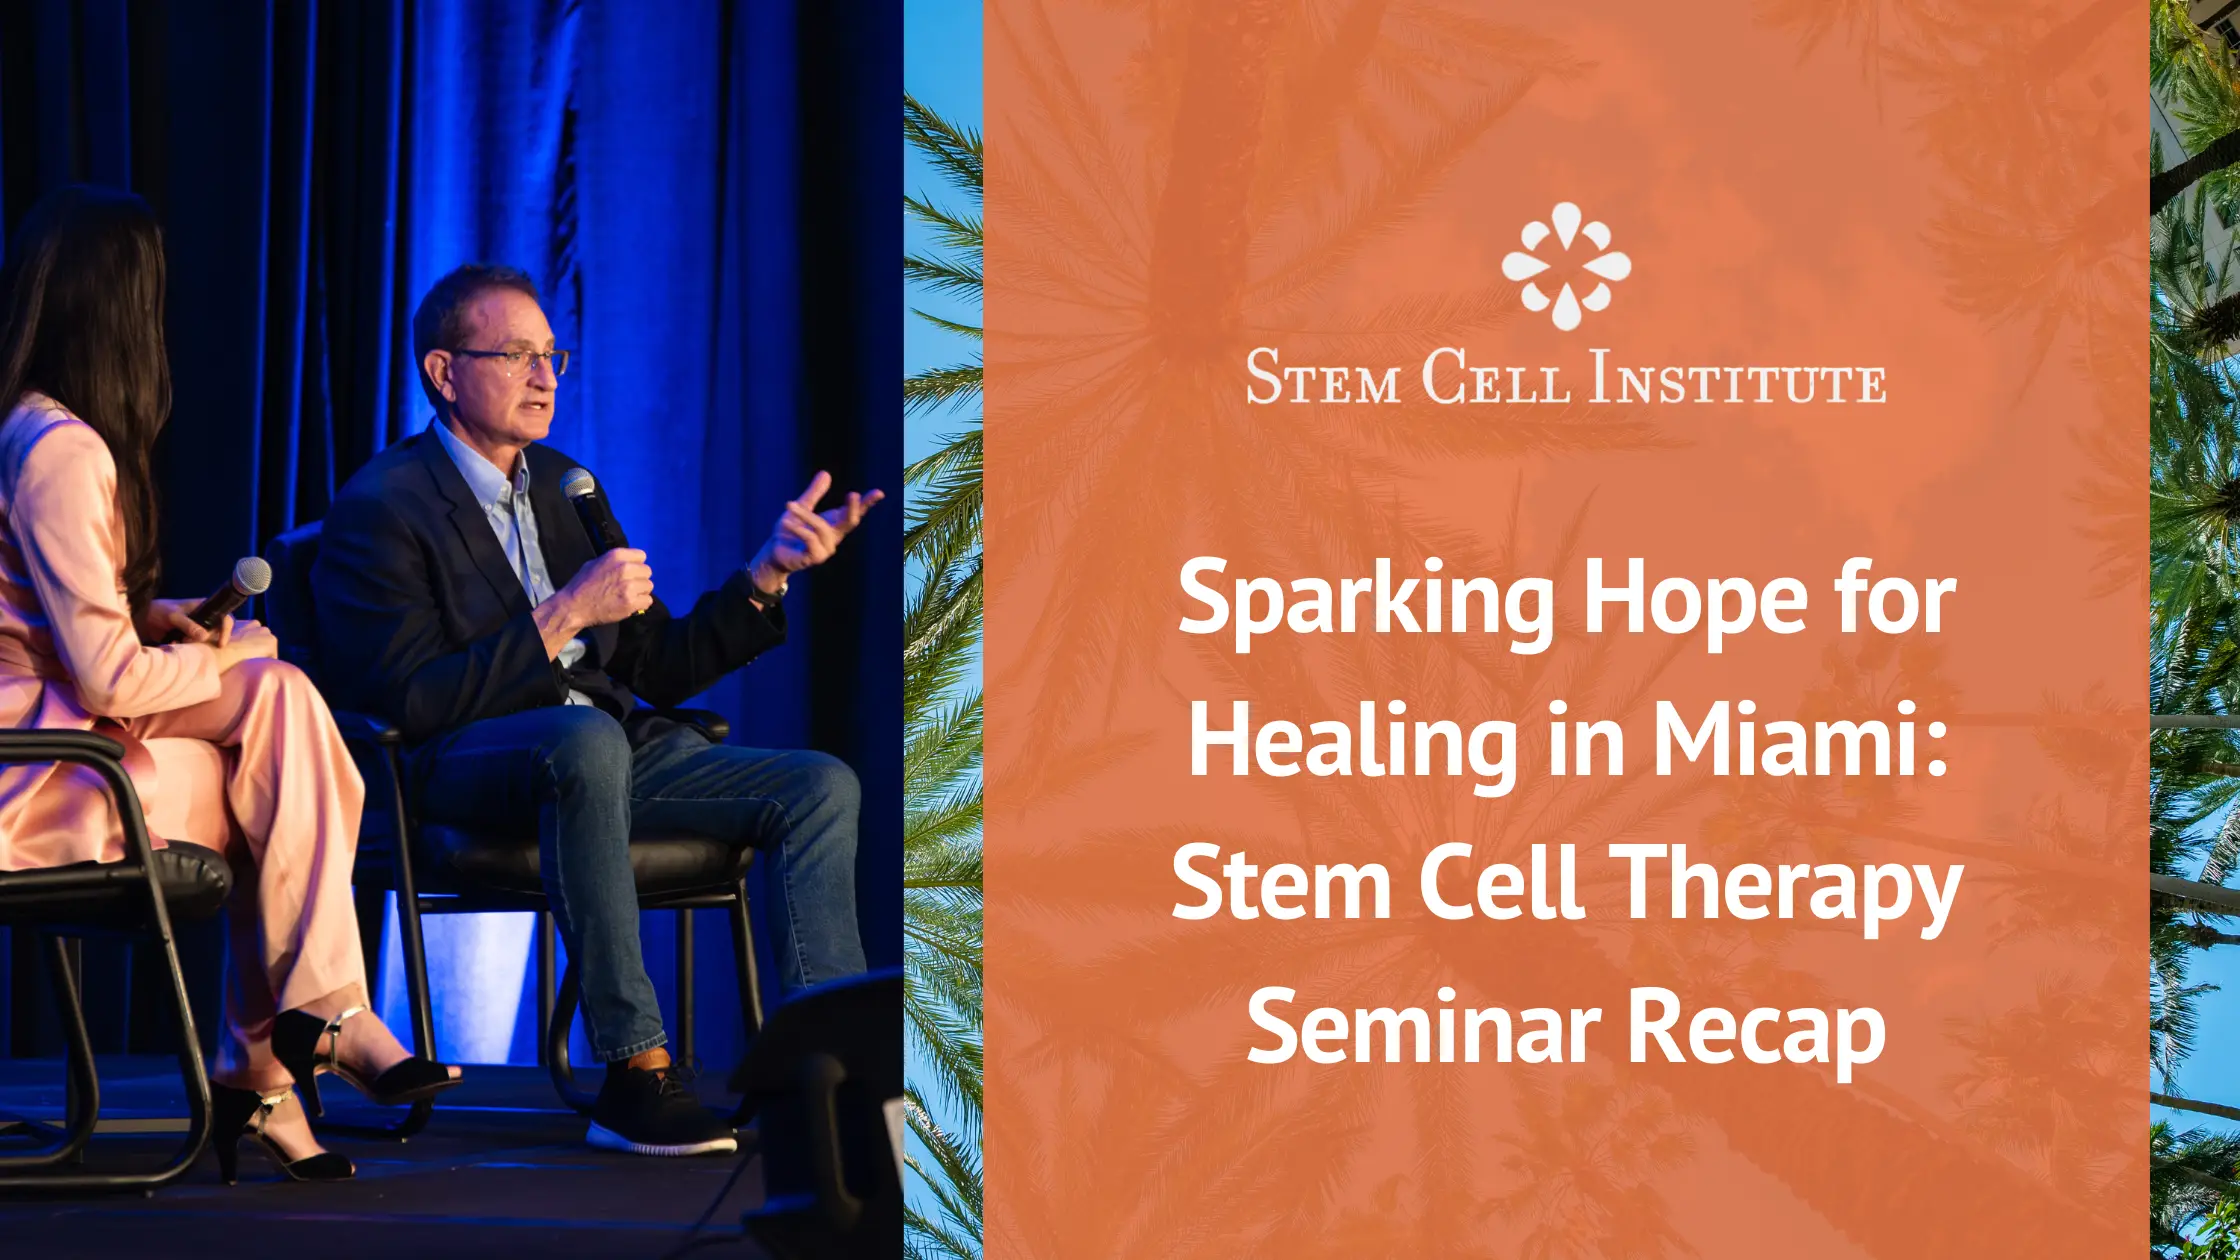 Sparking Hope for Healing in Miami: Stem Cell Therapy Seminar Recap